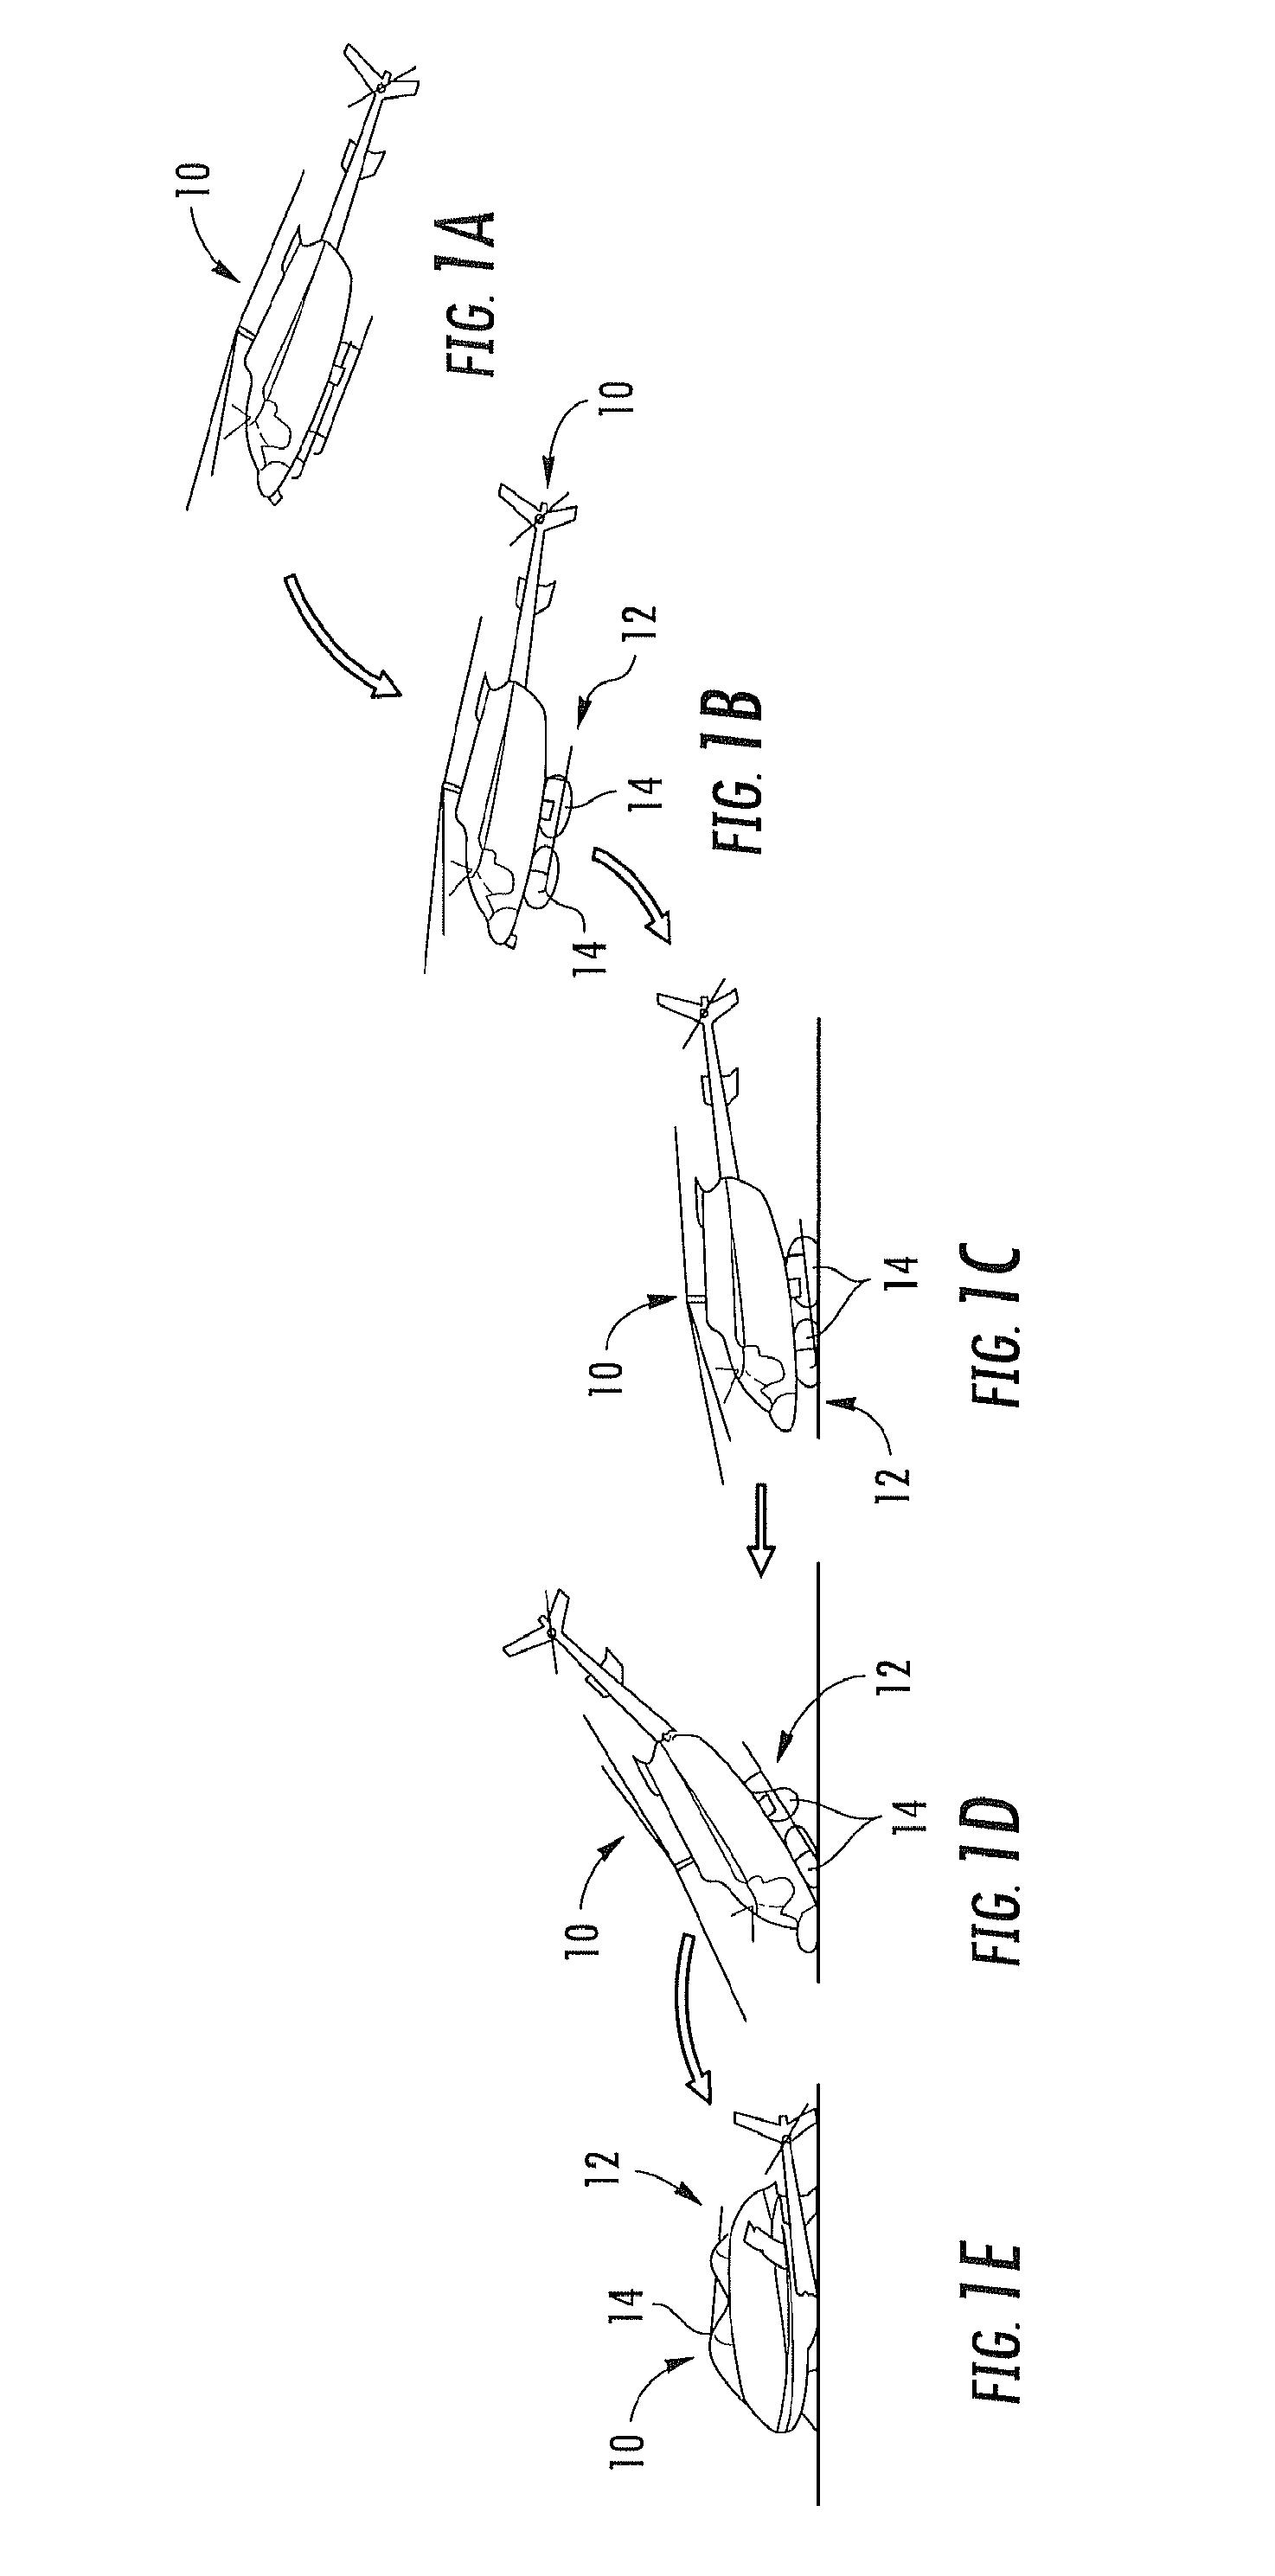 Aircraft occupant protection system